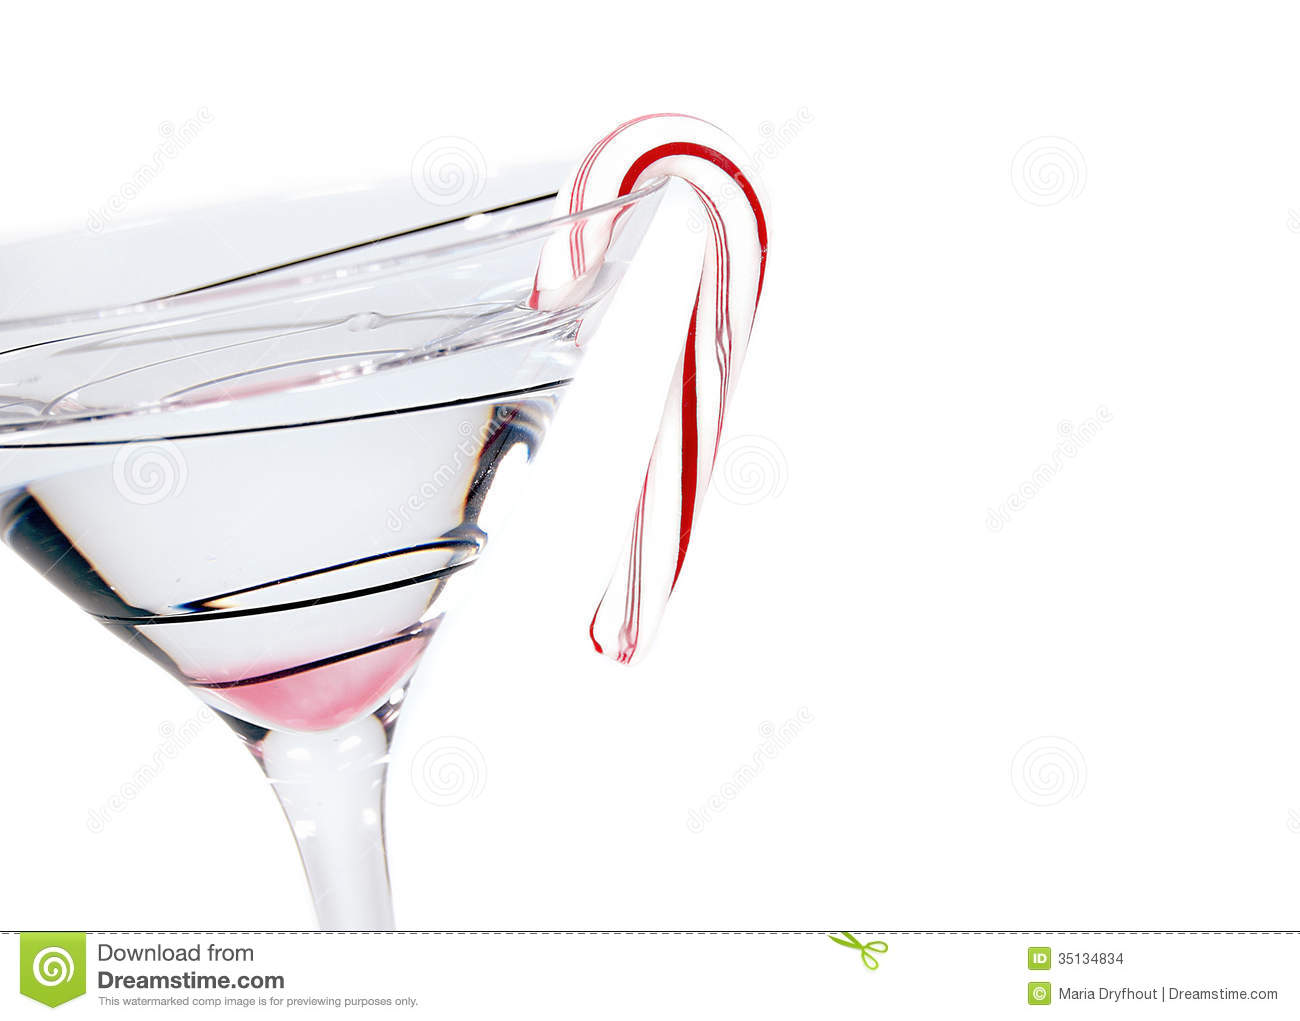 Christmas Candy Cane Hooked On Martini Glass Isolated On White